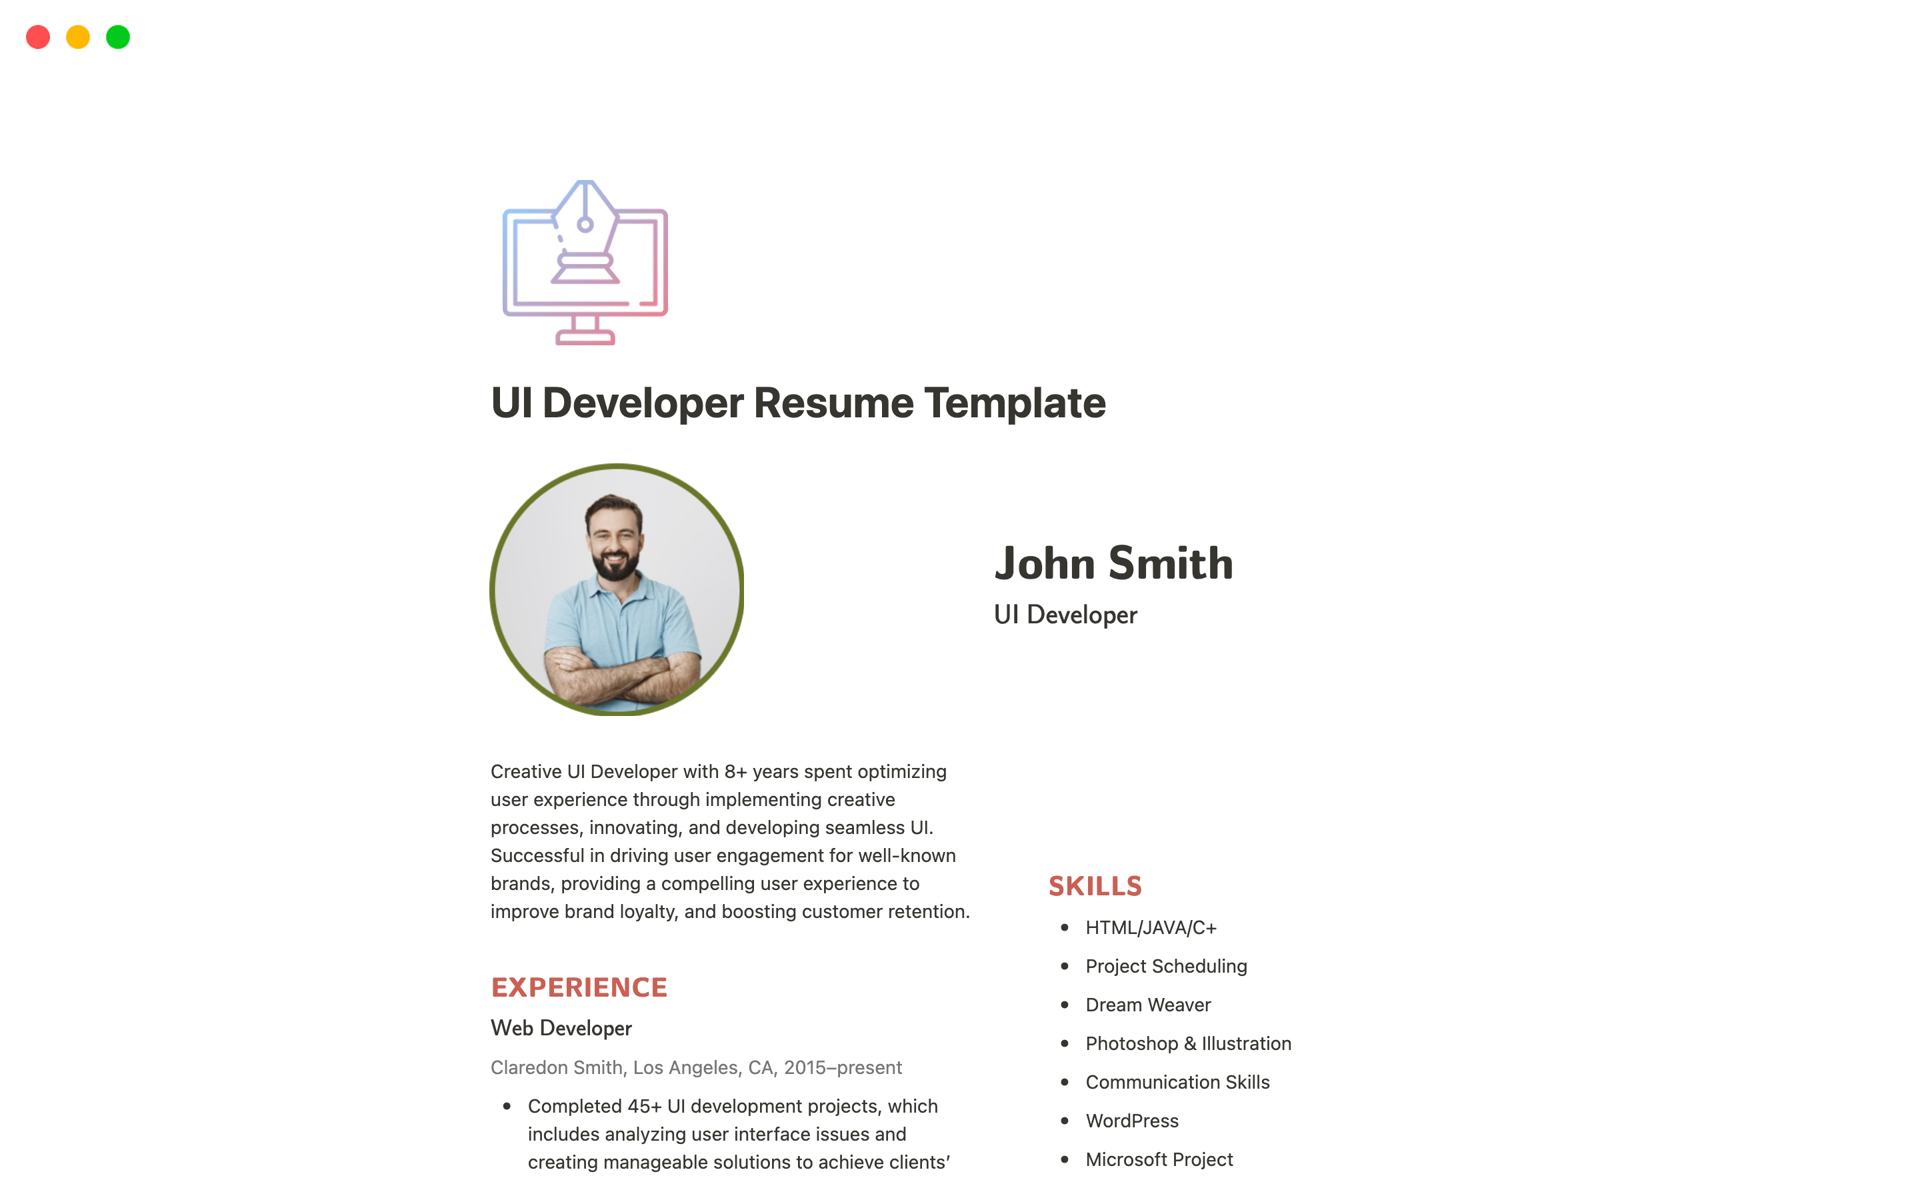 🎨 UI Developer Odyssey: Design Maestro Edition 🌟
Embark on a design virtuoso journey with our UI Developer Resume Template, thoughtfully designed to guide you through showcasing your skills and experiences.